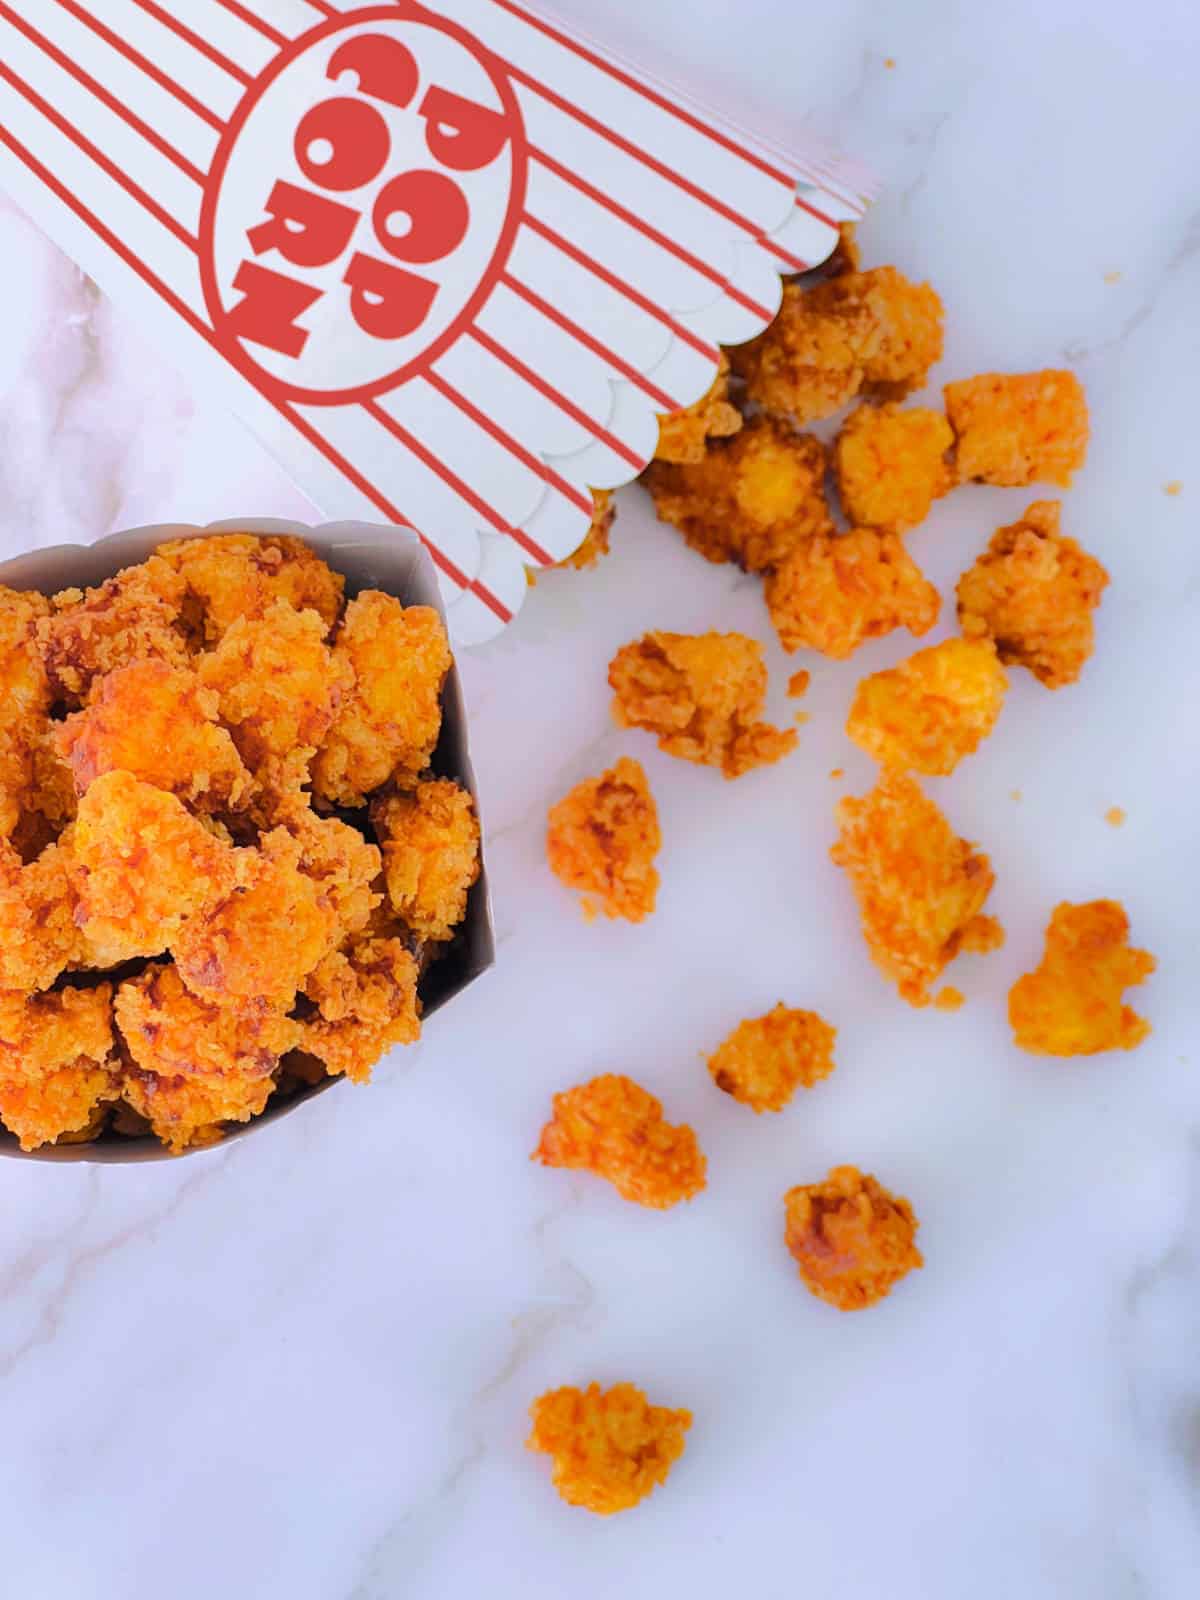 Popcorn chicken placed in a paper box on a marble background.